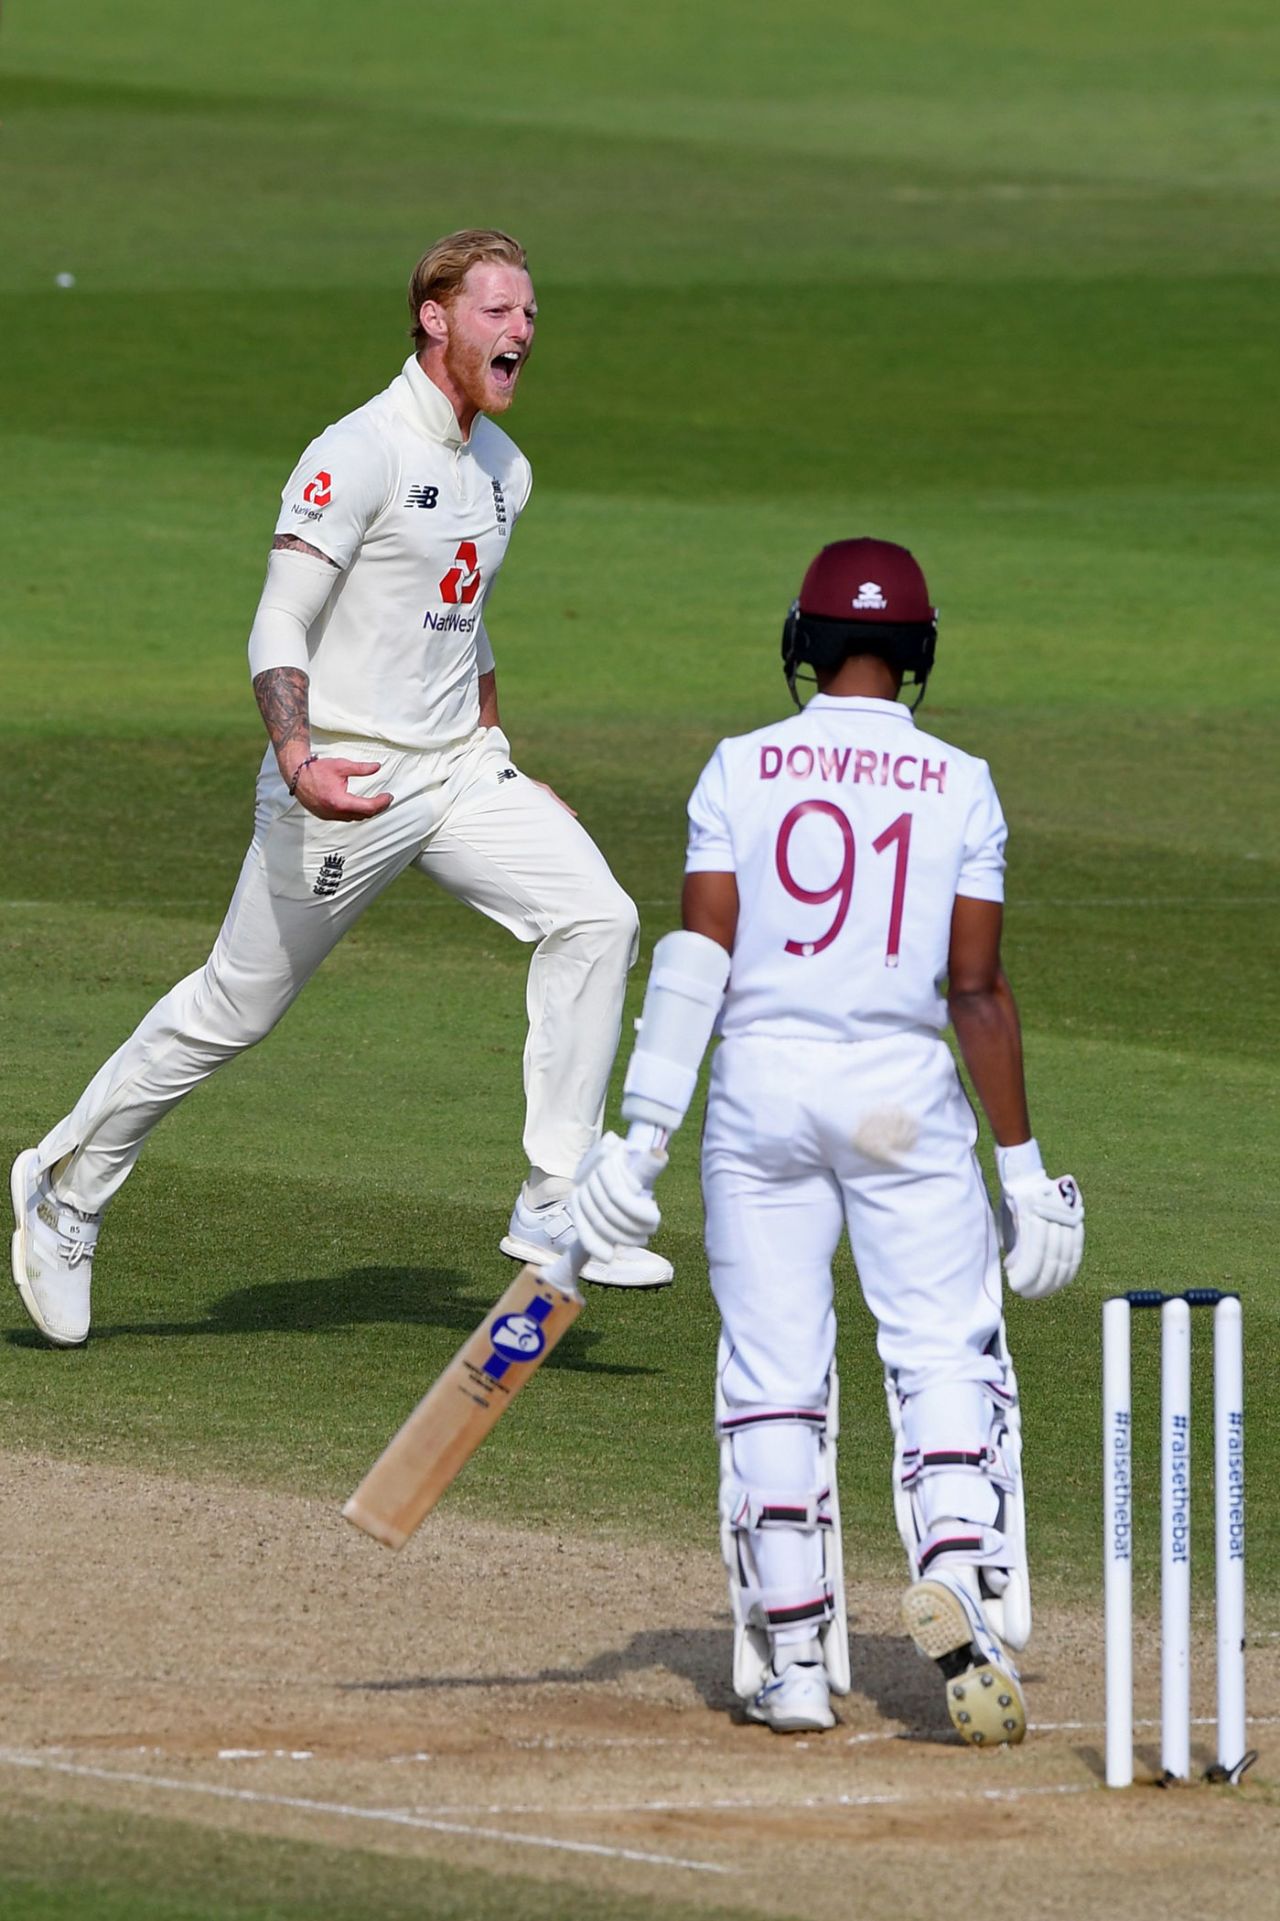 Ben Stokes celebrates after taking the wicket of Shane Dowrich, England v West Indies, 1st Test, 5th day, Southampton, July 12, 2020